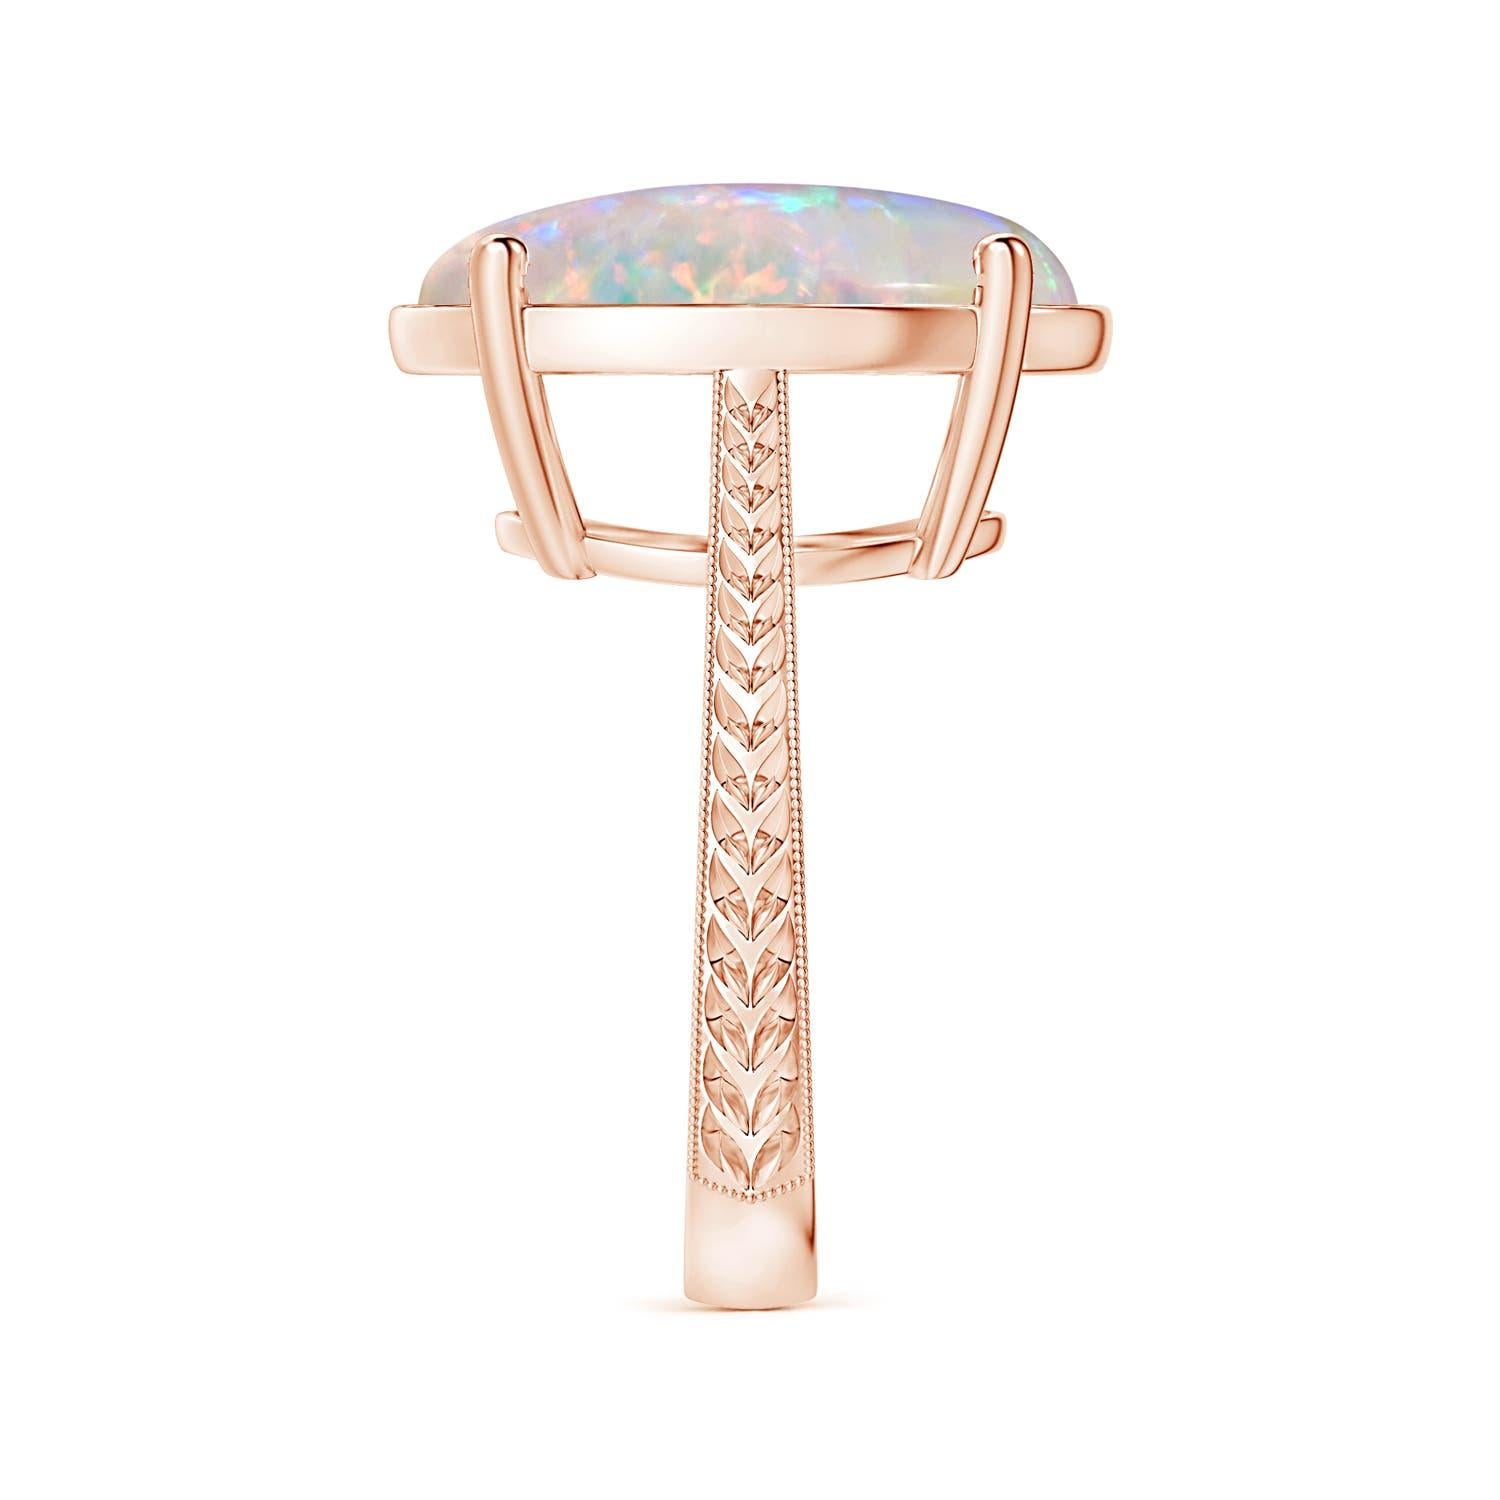 For Sale:  ANGARA GIA Certified Solitaire Opal Ring in Rose Gold with Leaf Motifs 4